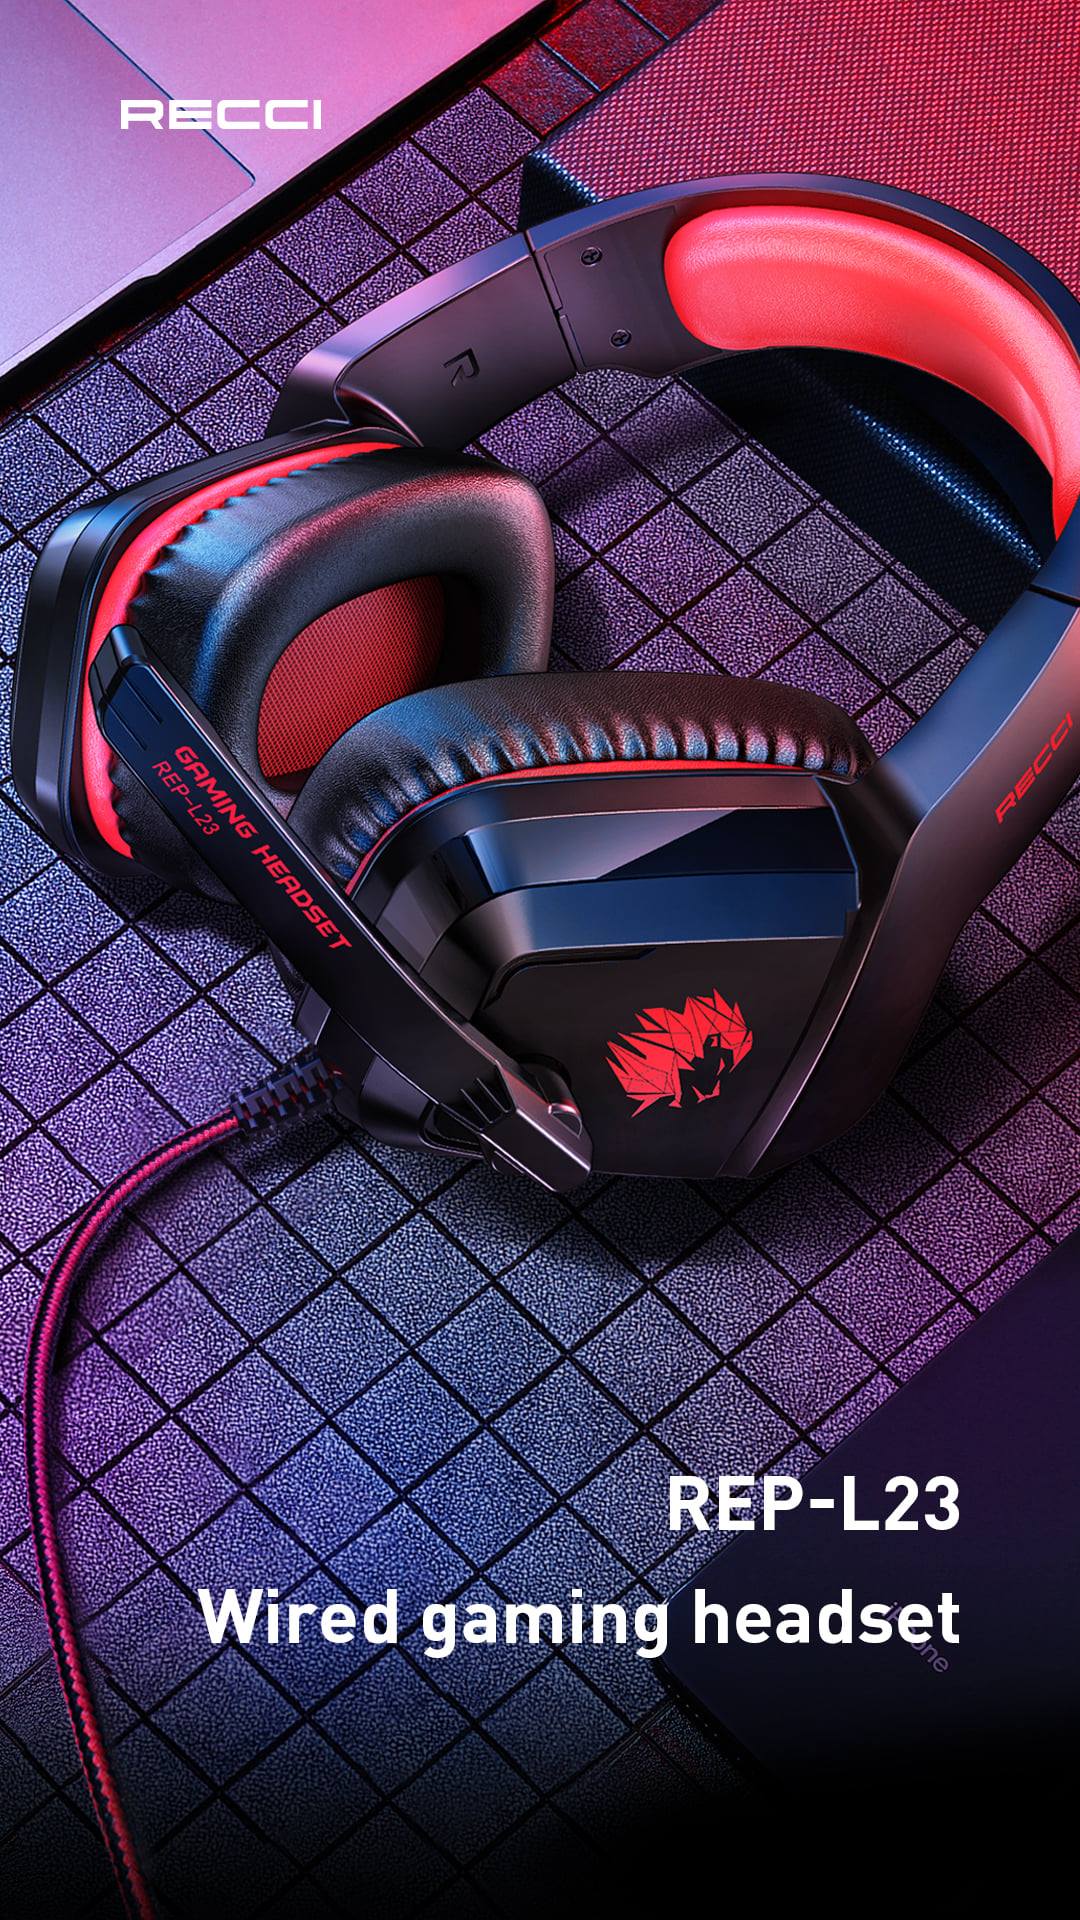 Recci Wired Gaming Headphone (REP-L23) (Red) (Retail Packaging) (PE-0172)